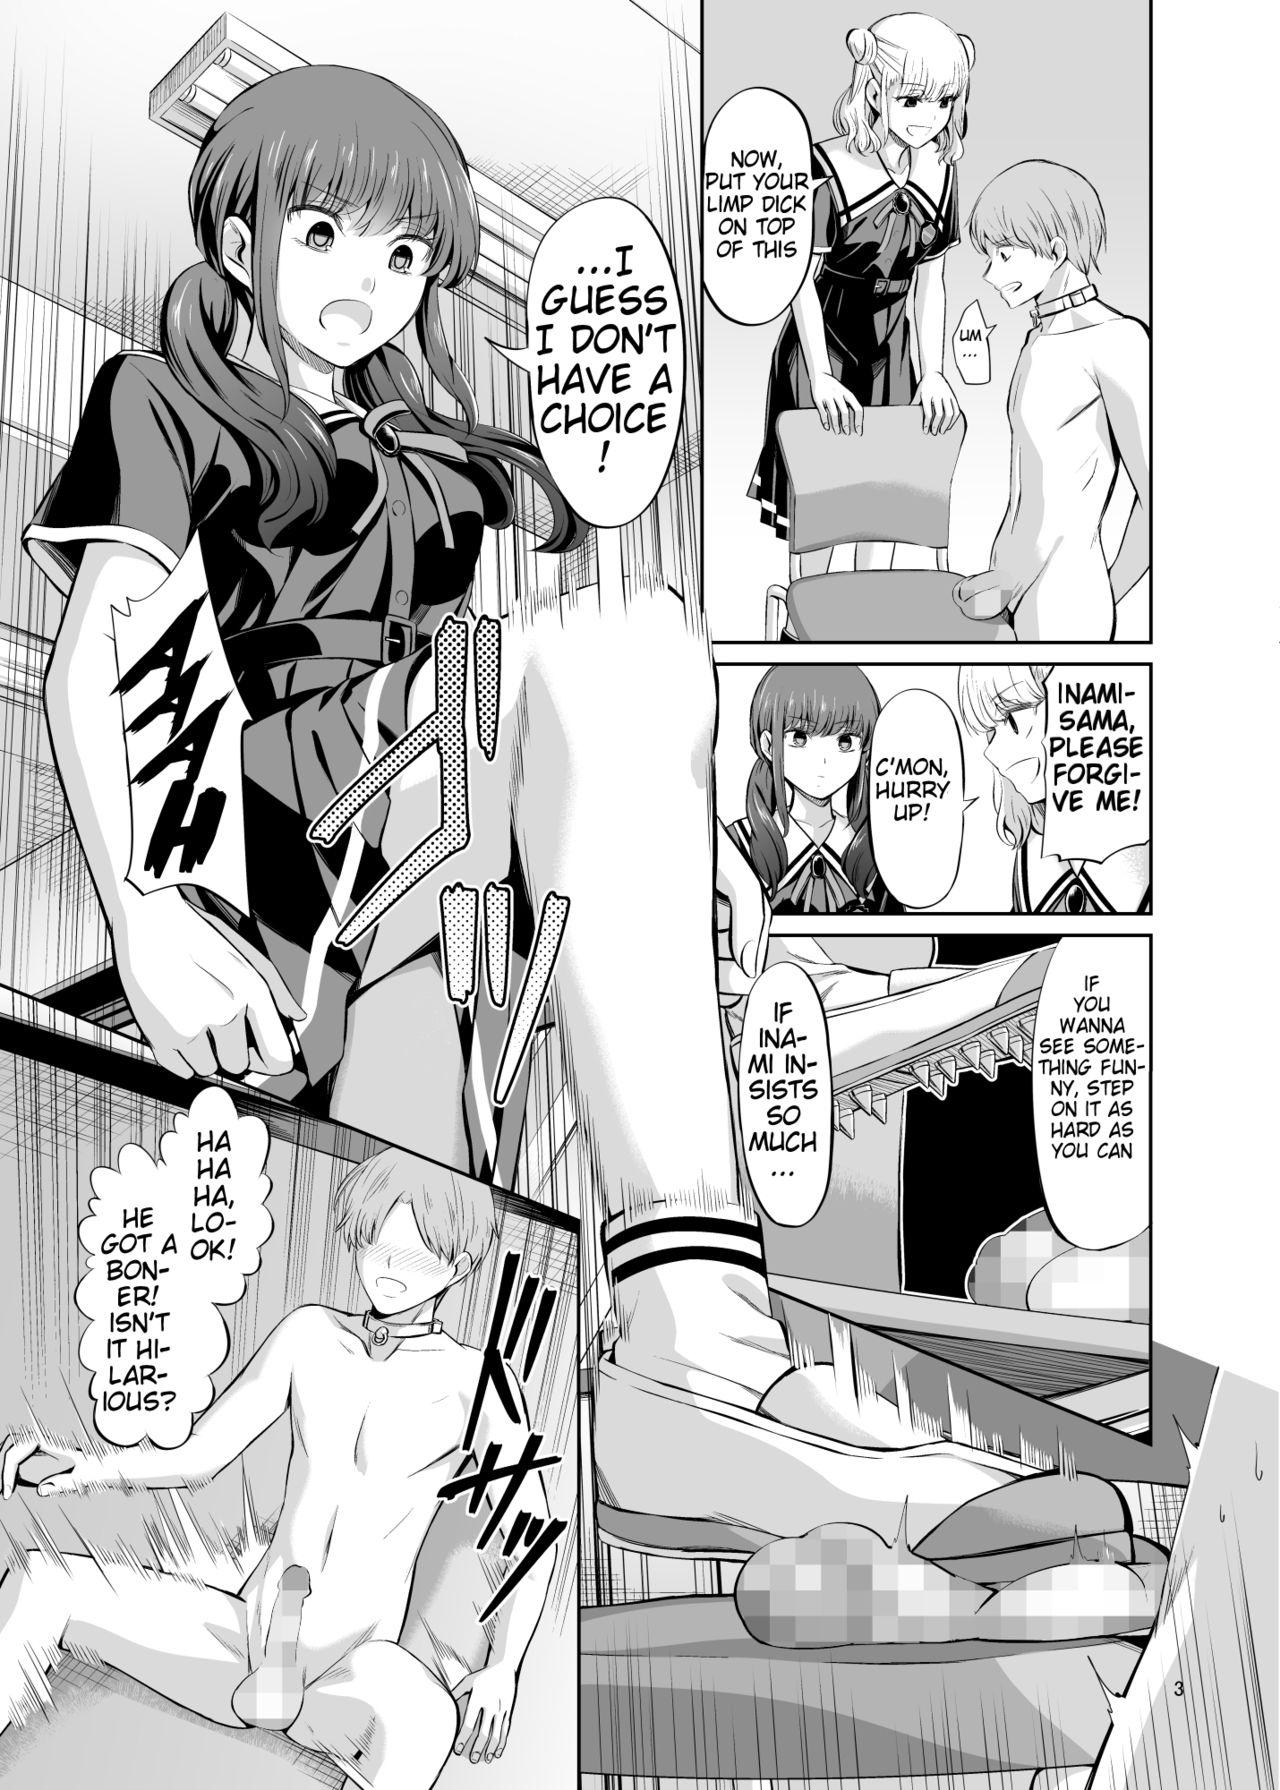 Nasty Tensoushugi no Kuni Kouhen | A Country Based on Point System, Second Part - Original Actress - Page 5